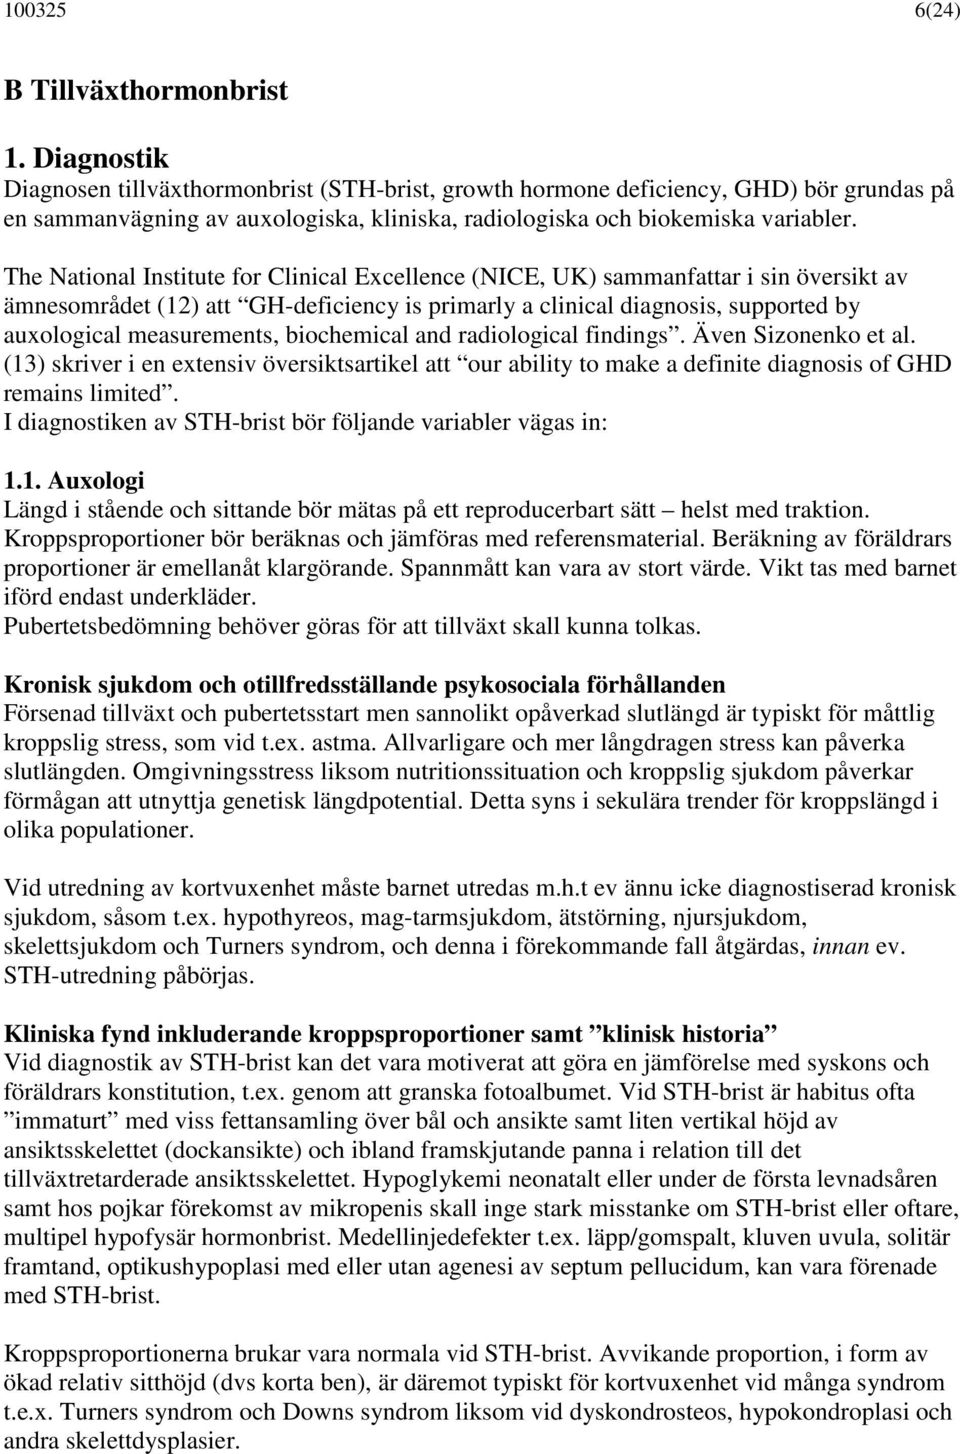 The National Institute for Clinical Excellence (NICE, UK) sammanfattar i sin översikt av ämnesområdet (12) att GH-deficiency is primarly a clinical diagnosis, supported by auxological measurements,